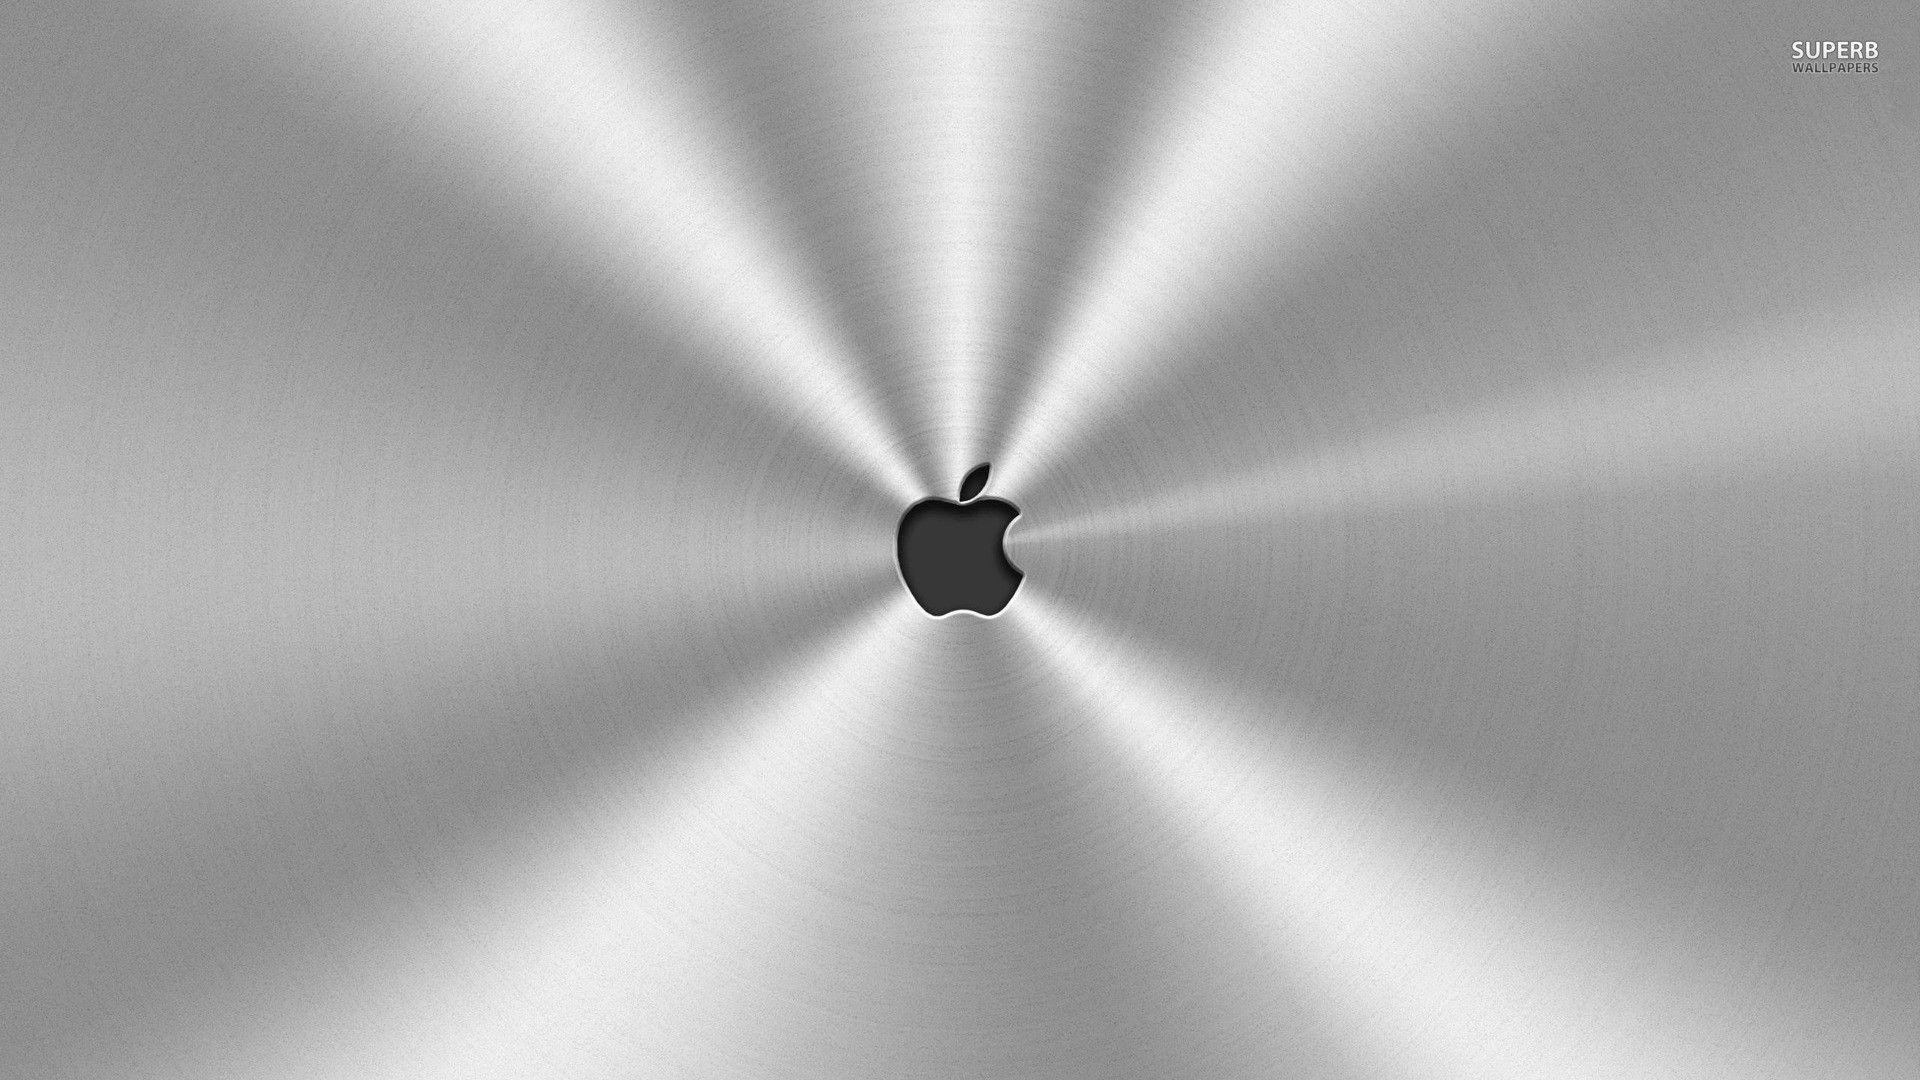 1920x1080 Apple logo surrounded by metal wallpaper - Computer wallpapers - #